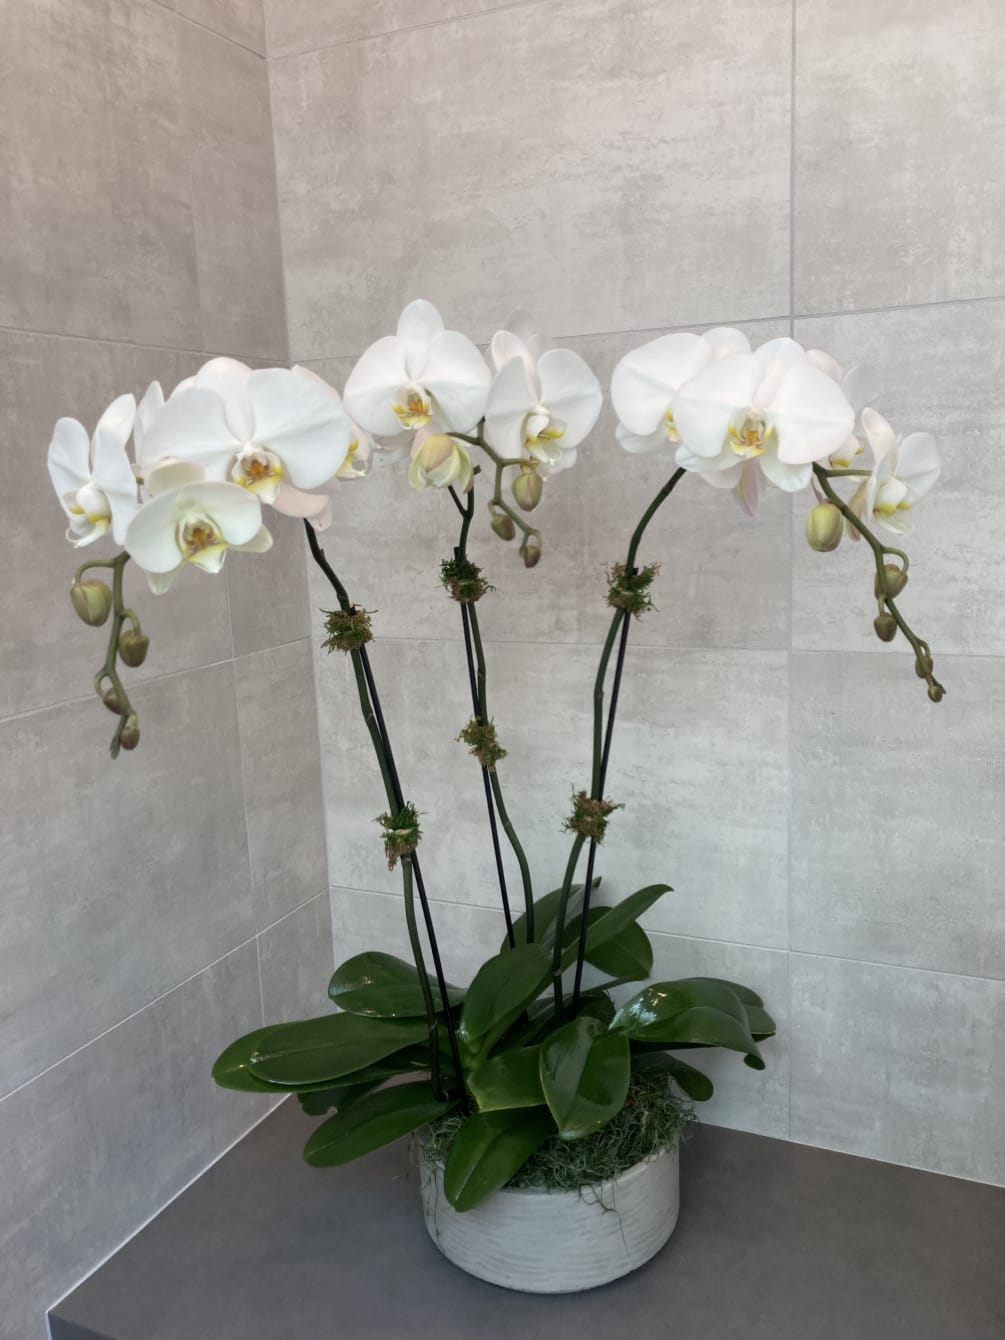 3 stems of white phalaenopsis orchids elegantly dress in a container. Containers